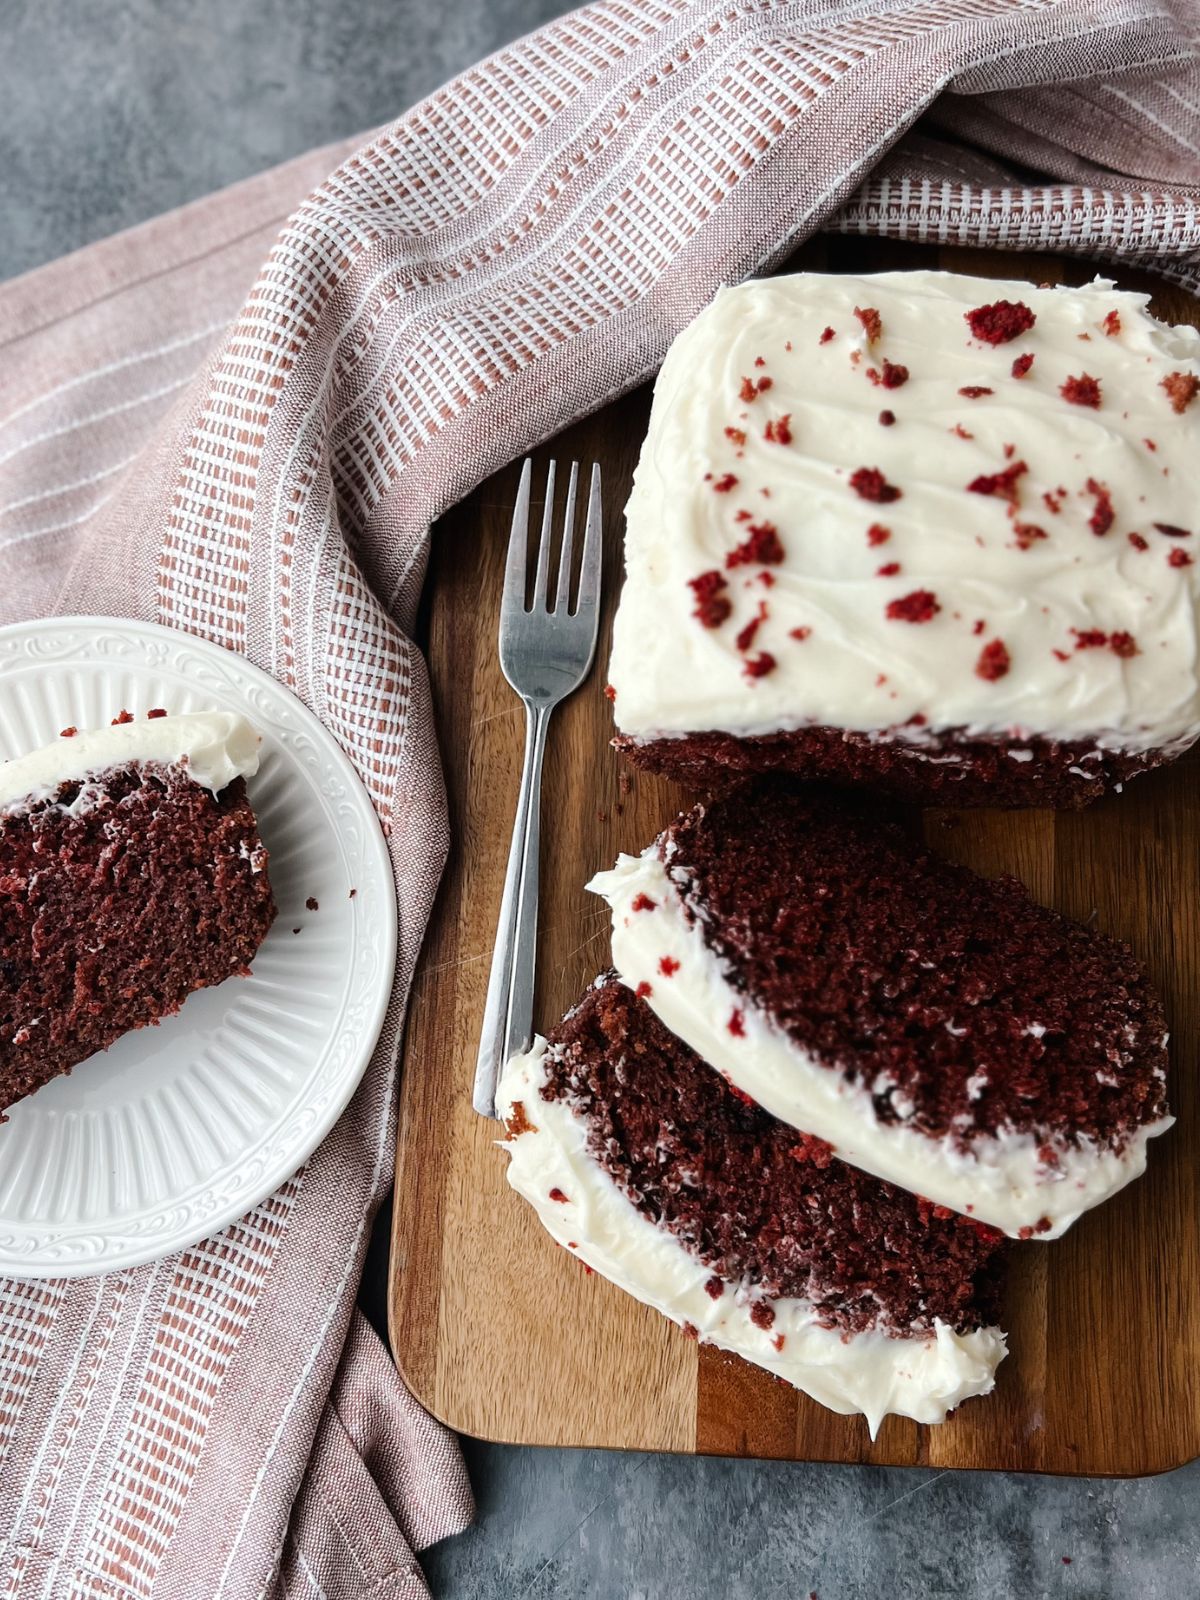 Red velvet loaf cake with three slices cut. Two of the slices sit with the loaf cake on a wooden cutting board. The third is on a plate next to it.